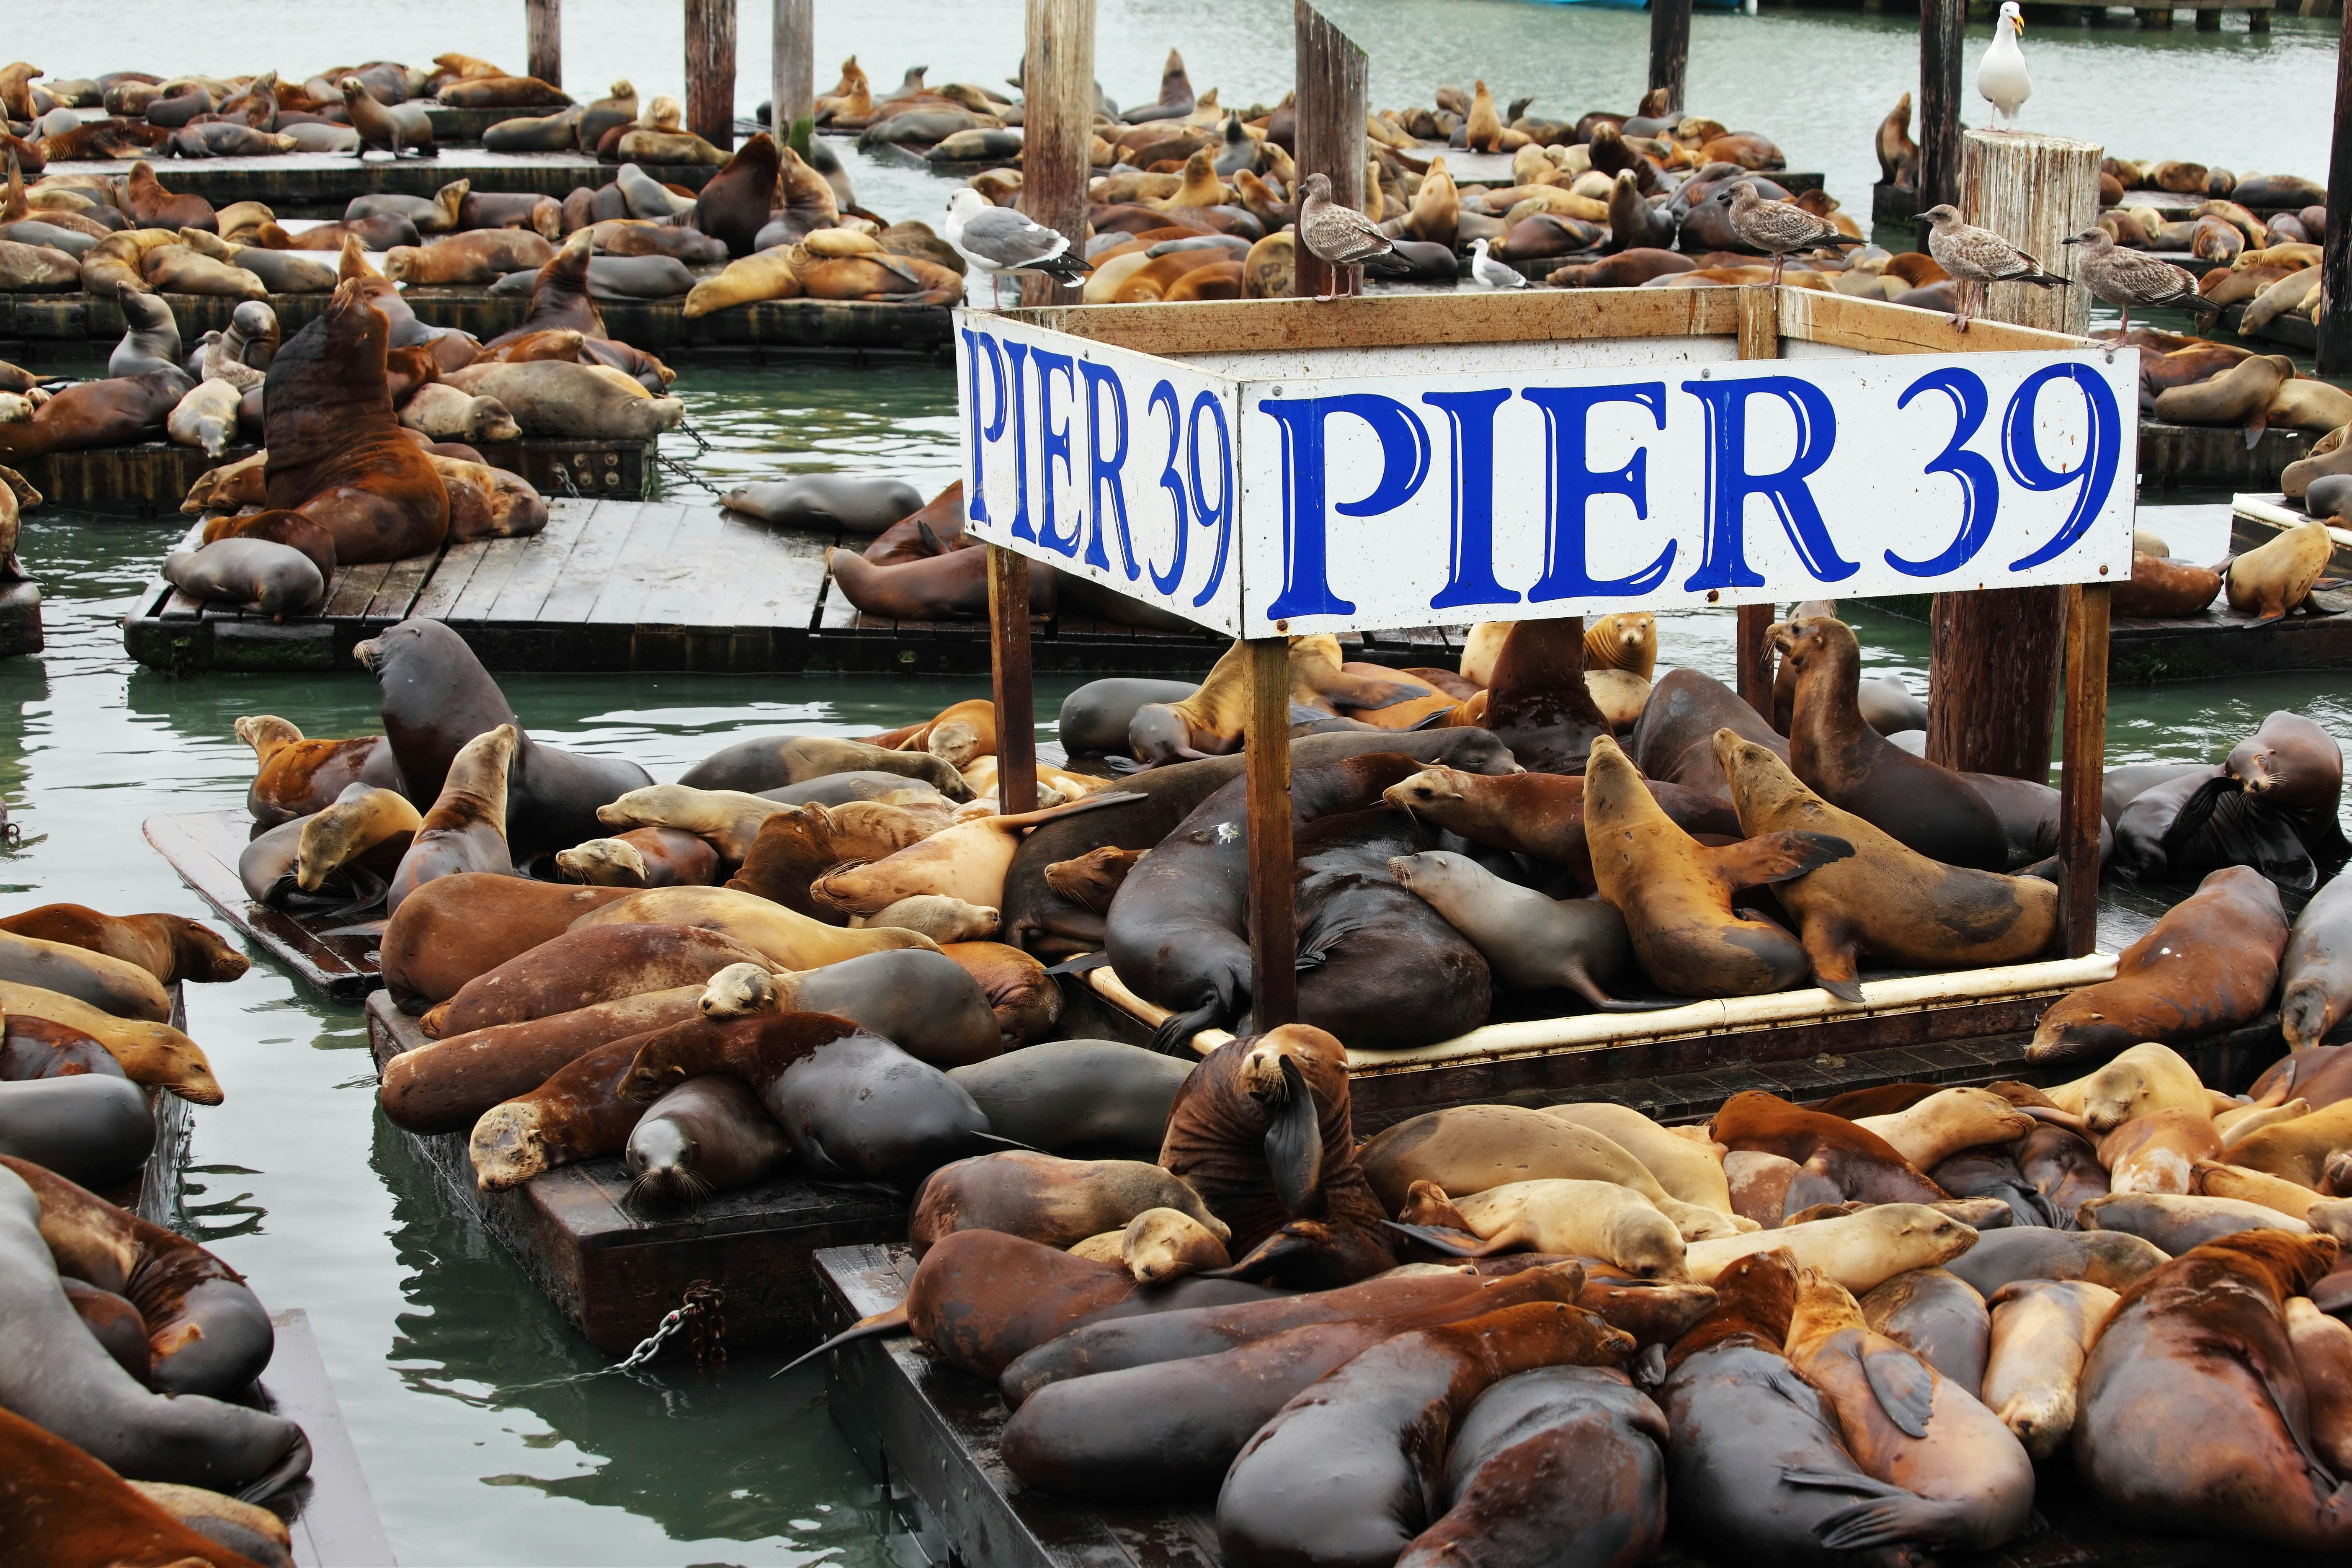 PIER 39  Things to do in Fisherman's Wharf, San Francisco